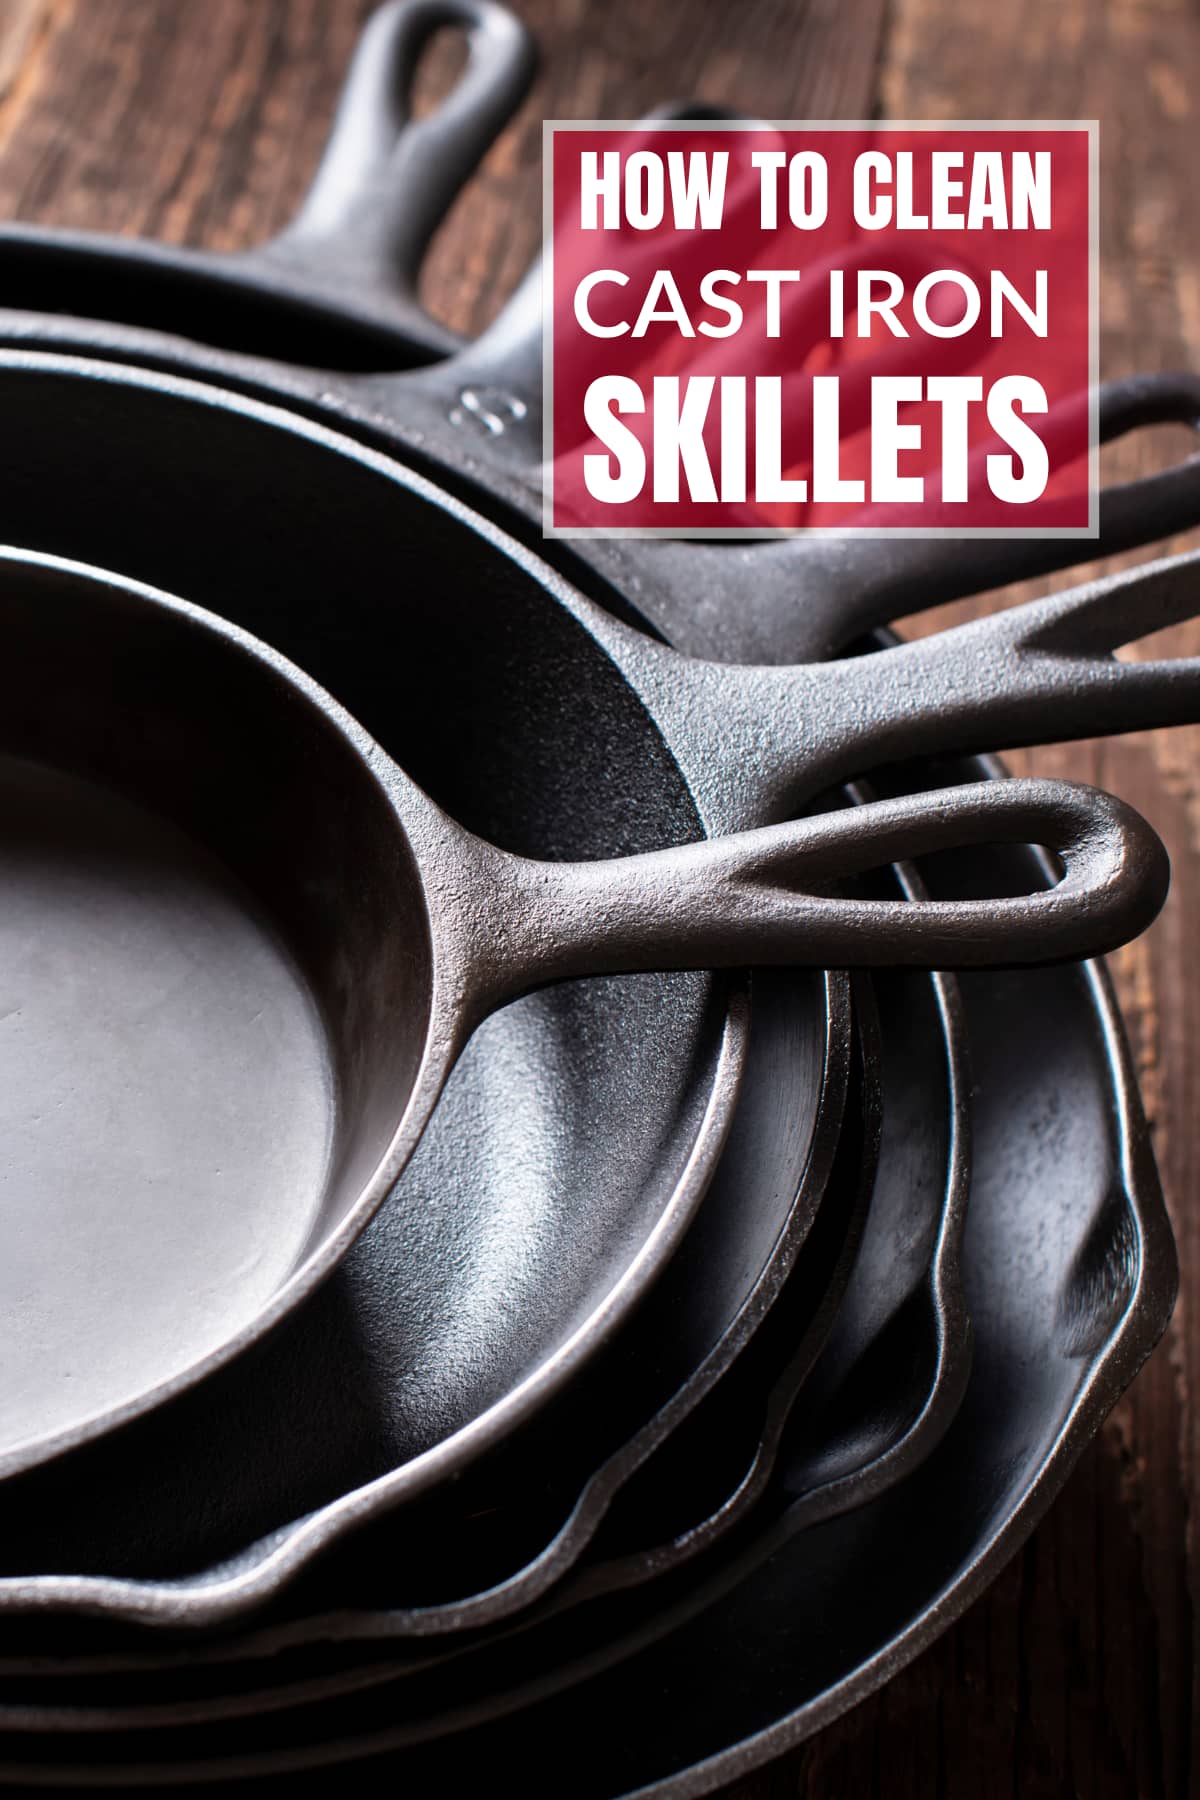 An overhead image of cast iron skillets with text overlay.